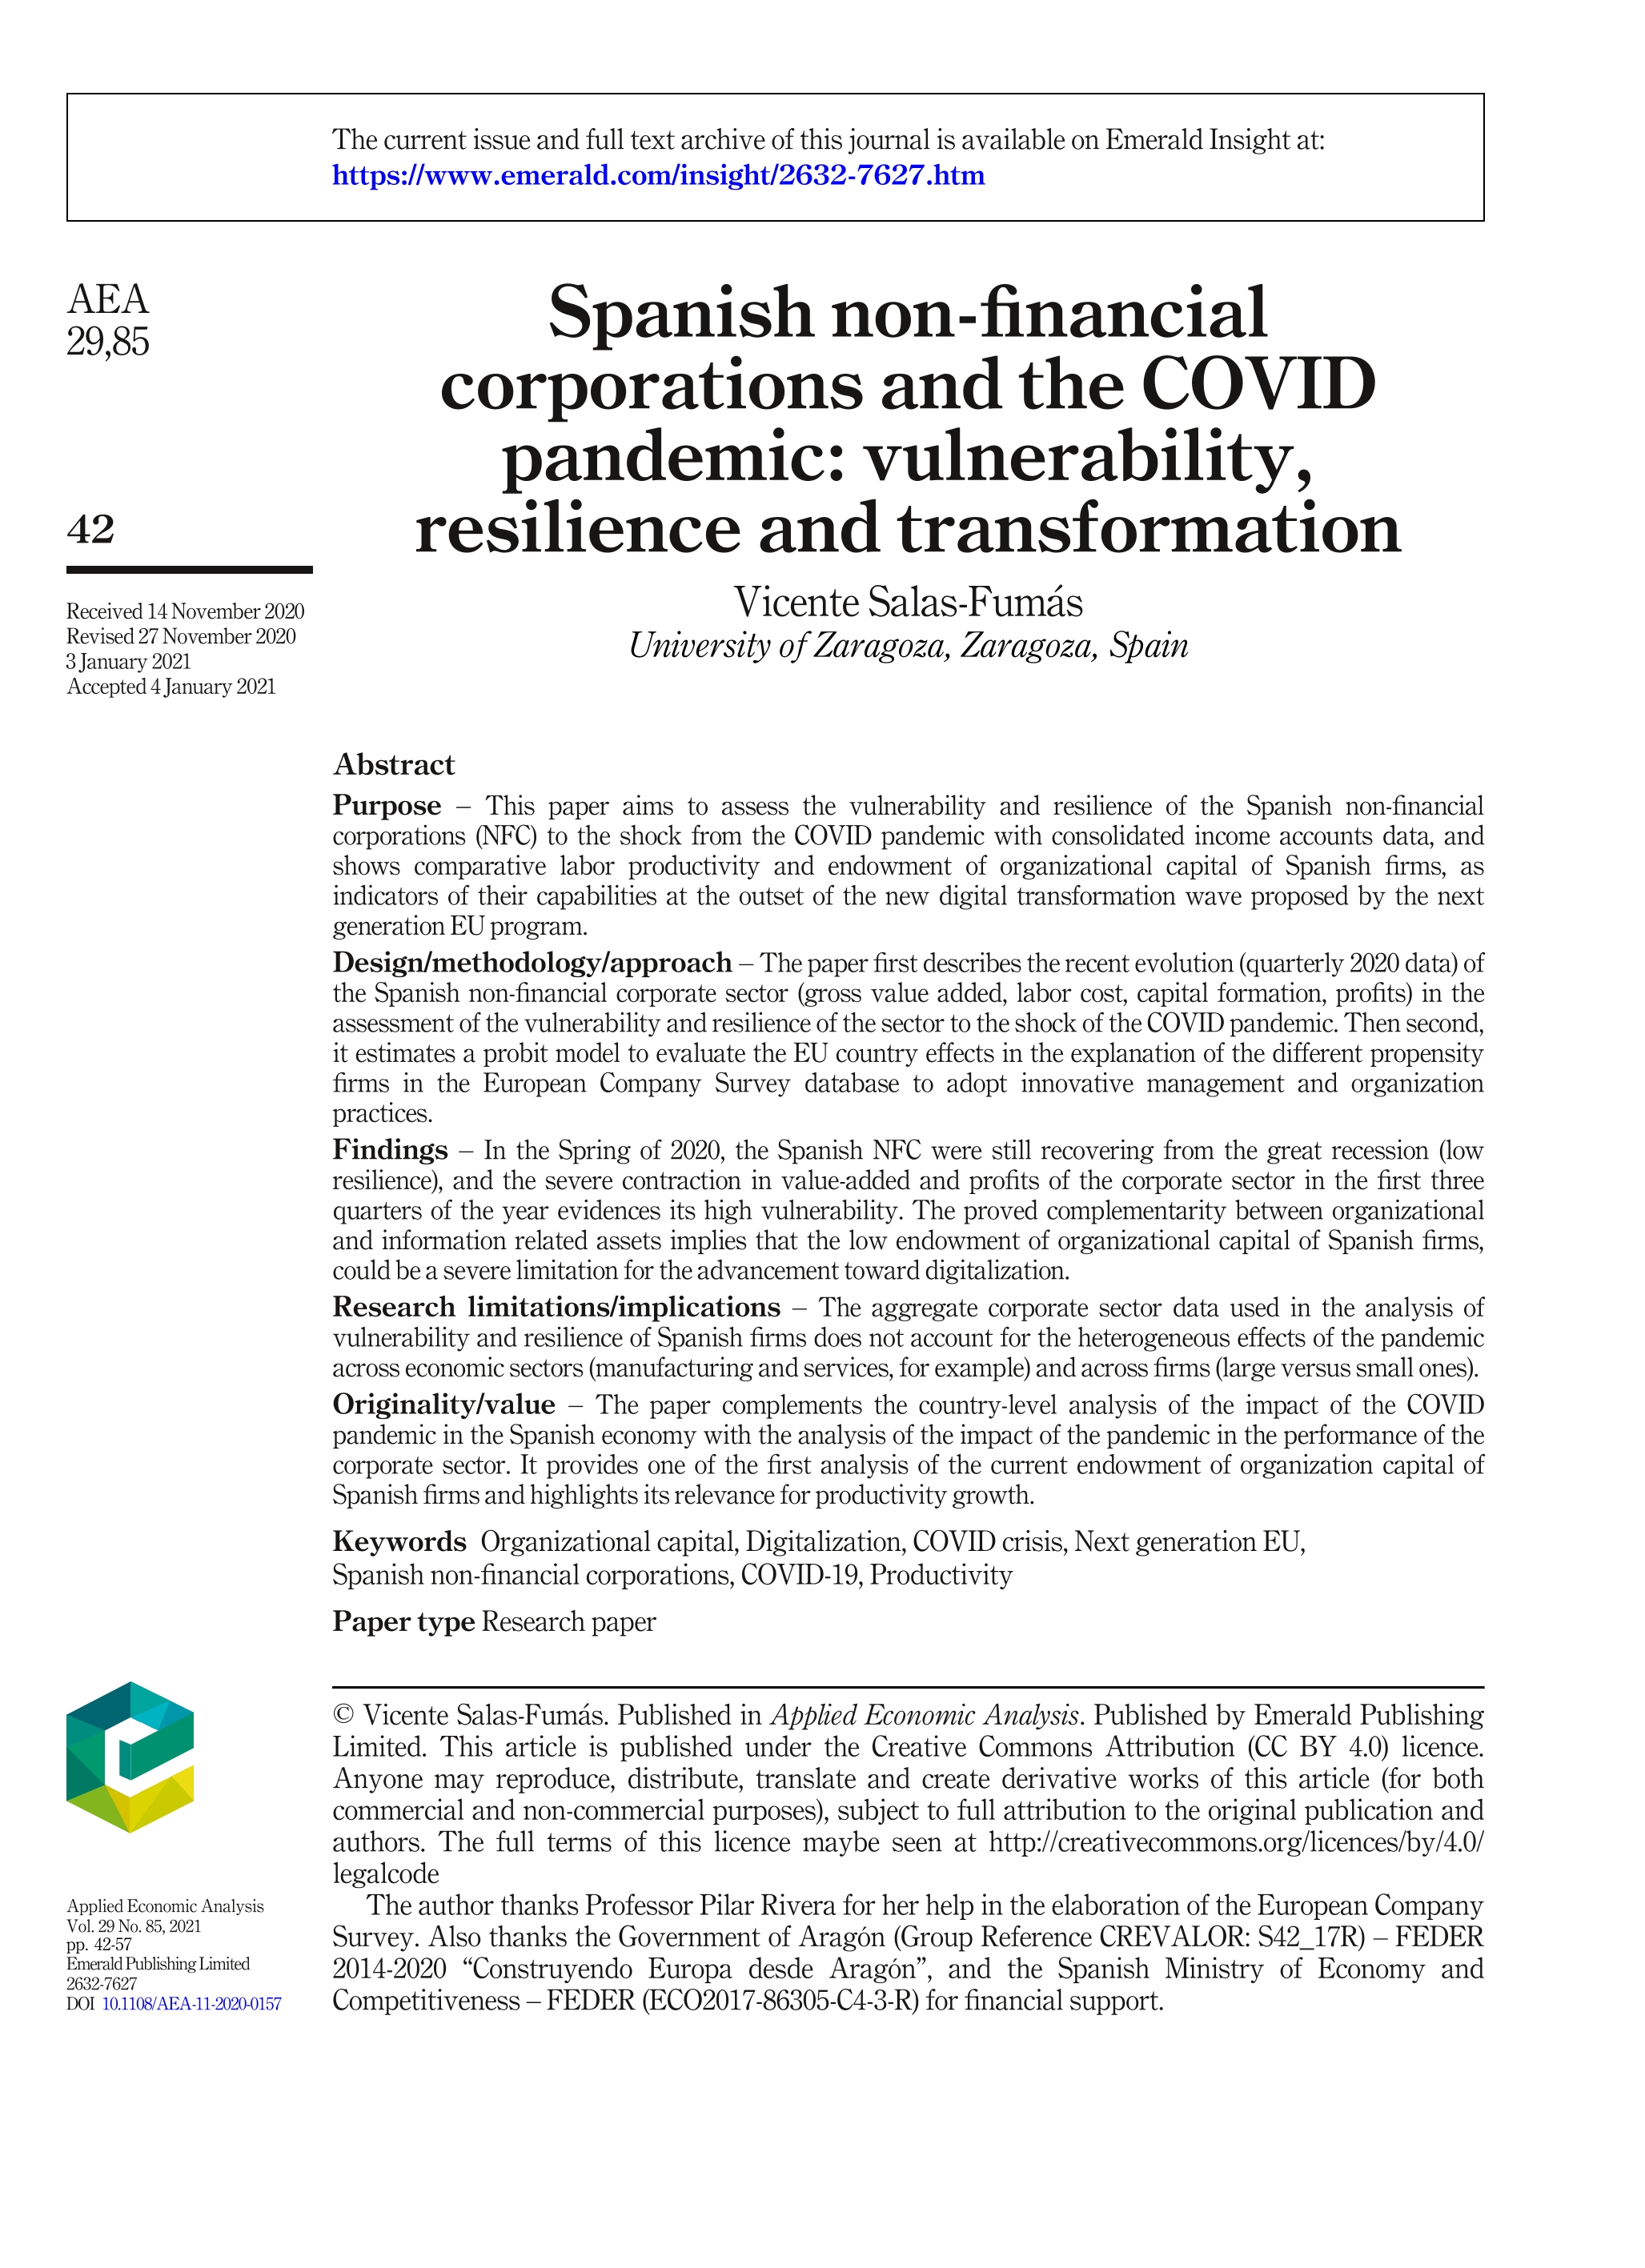 Spanish non-financial corporations and the COVID pandemic: vulnerability, resilience and transformation